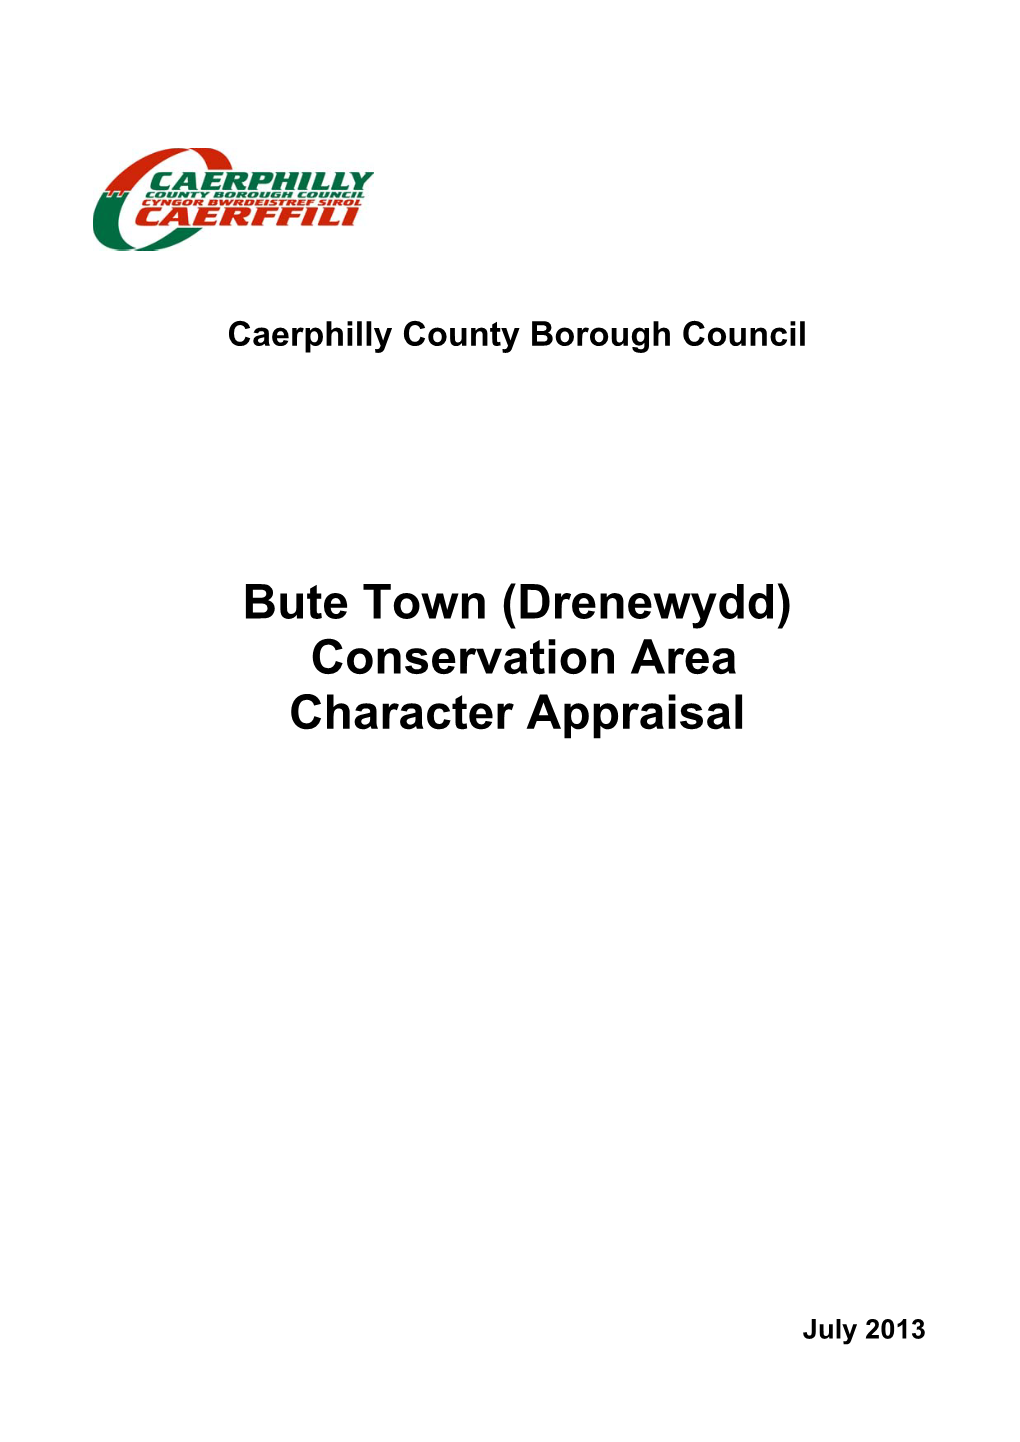 Bute Town (Drenewydd) Conservation Area Character Appraisal